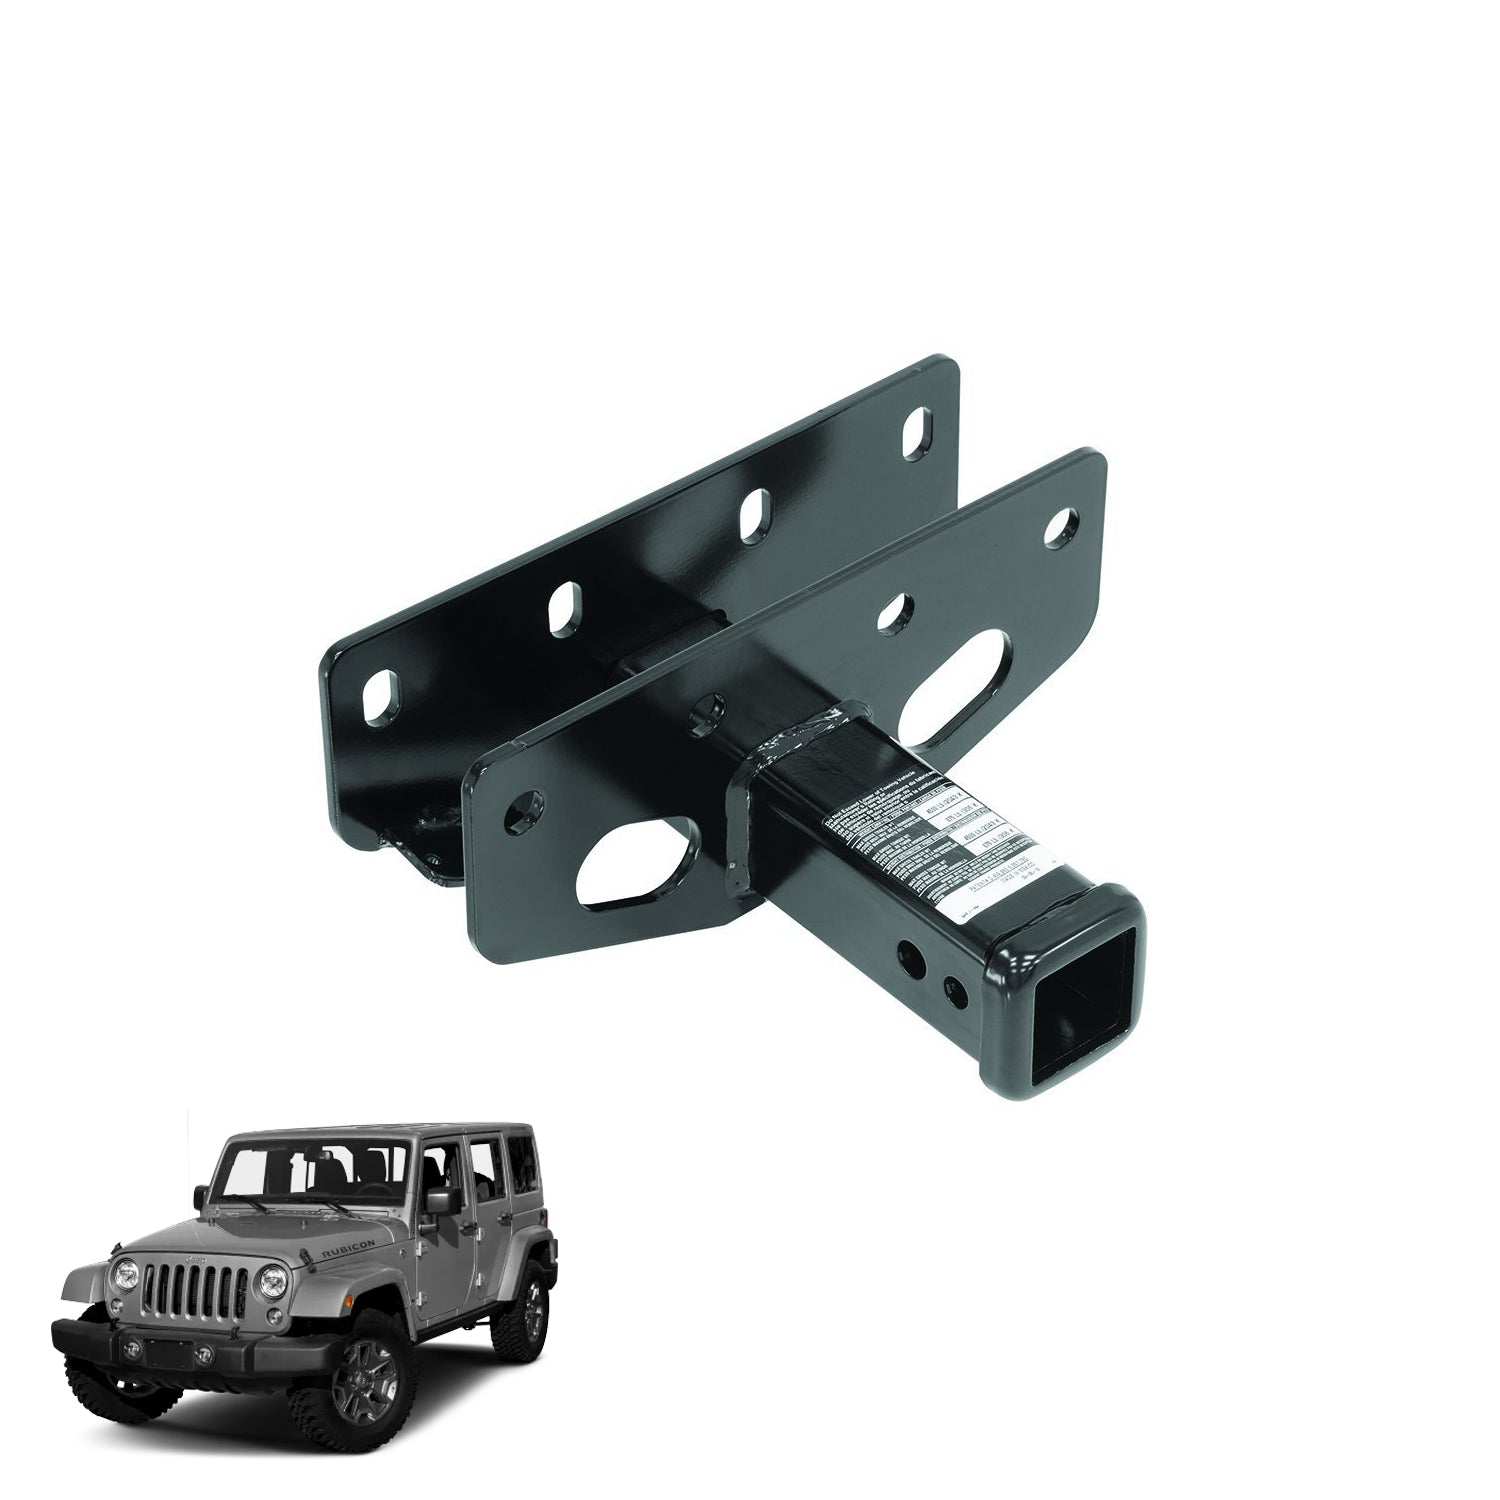 Draw-Tite Towing/Trailer Hitch 76104 Class 3 (Frame Receiver) for 2016-2019 Jeep Wrangler JL